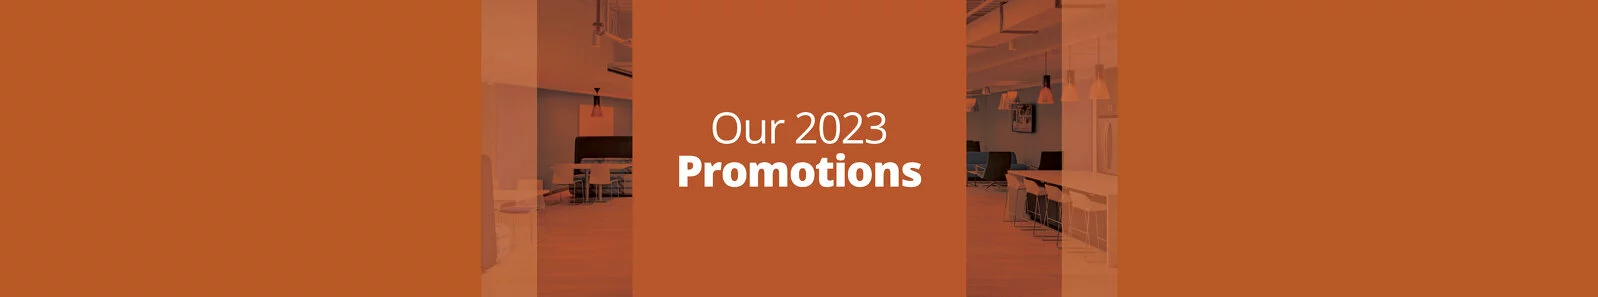 2023 Promotions